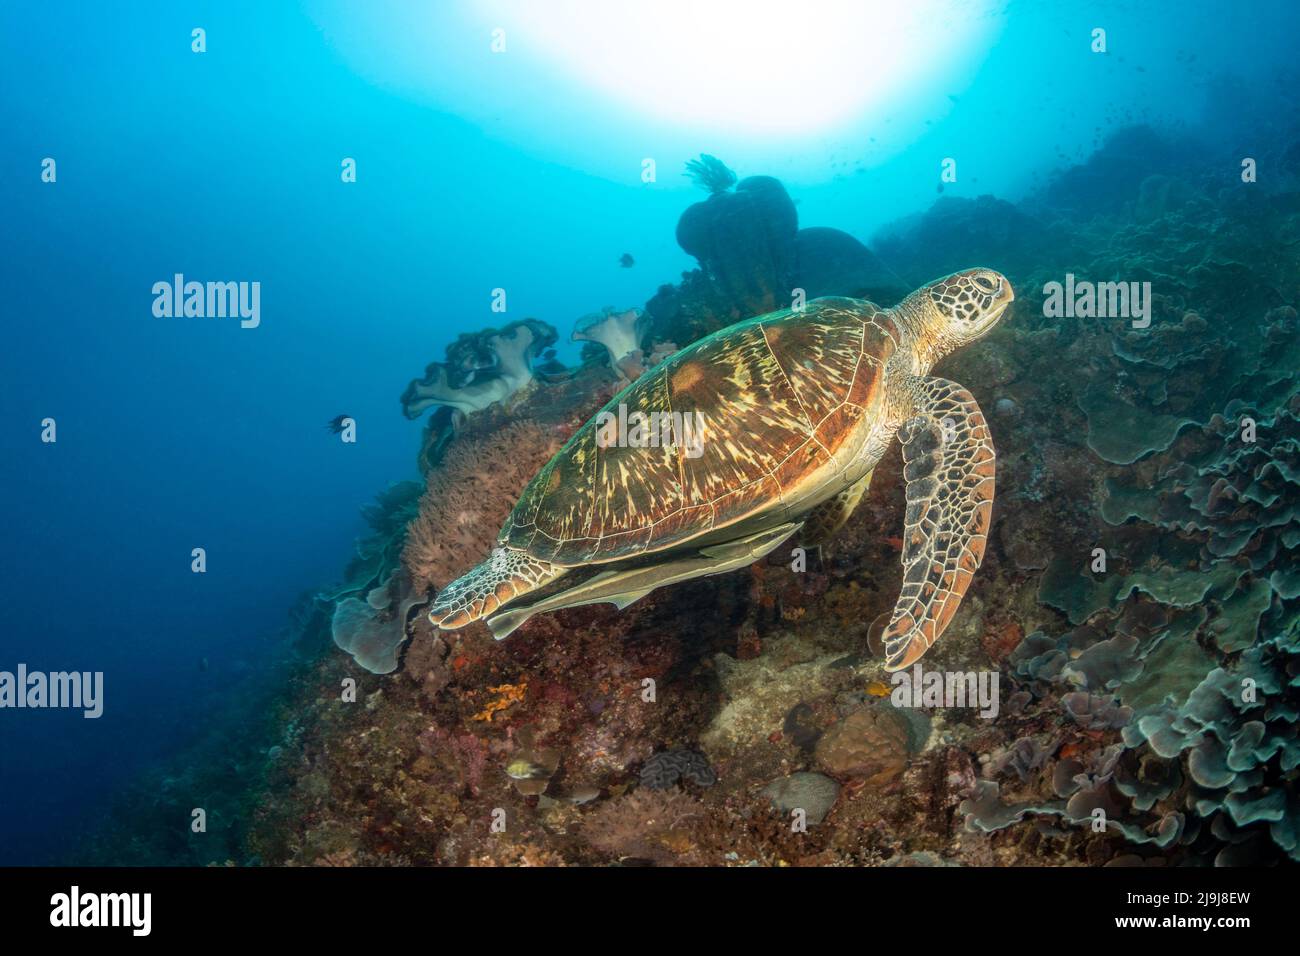 A sharksucker or remora, Echeneis naucrates, is clinging to the underside of this green sea turtle, Chelonia mydas, an endangered species, Philippines Stock Photo